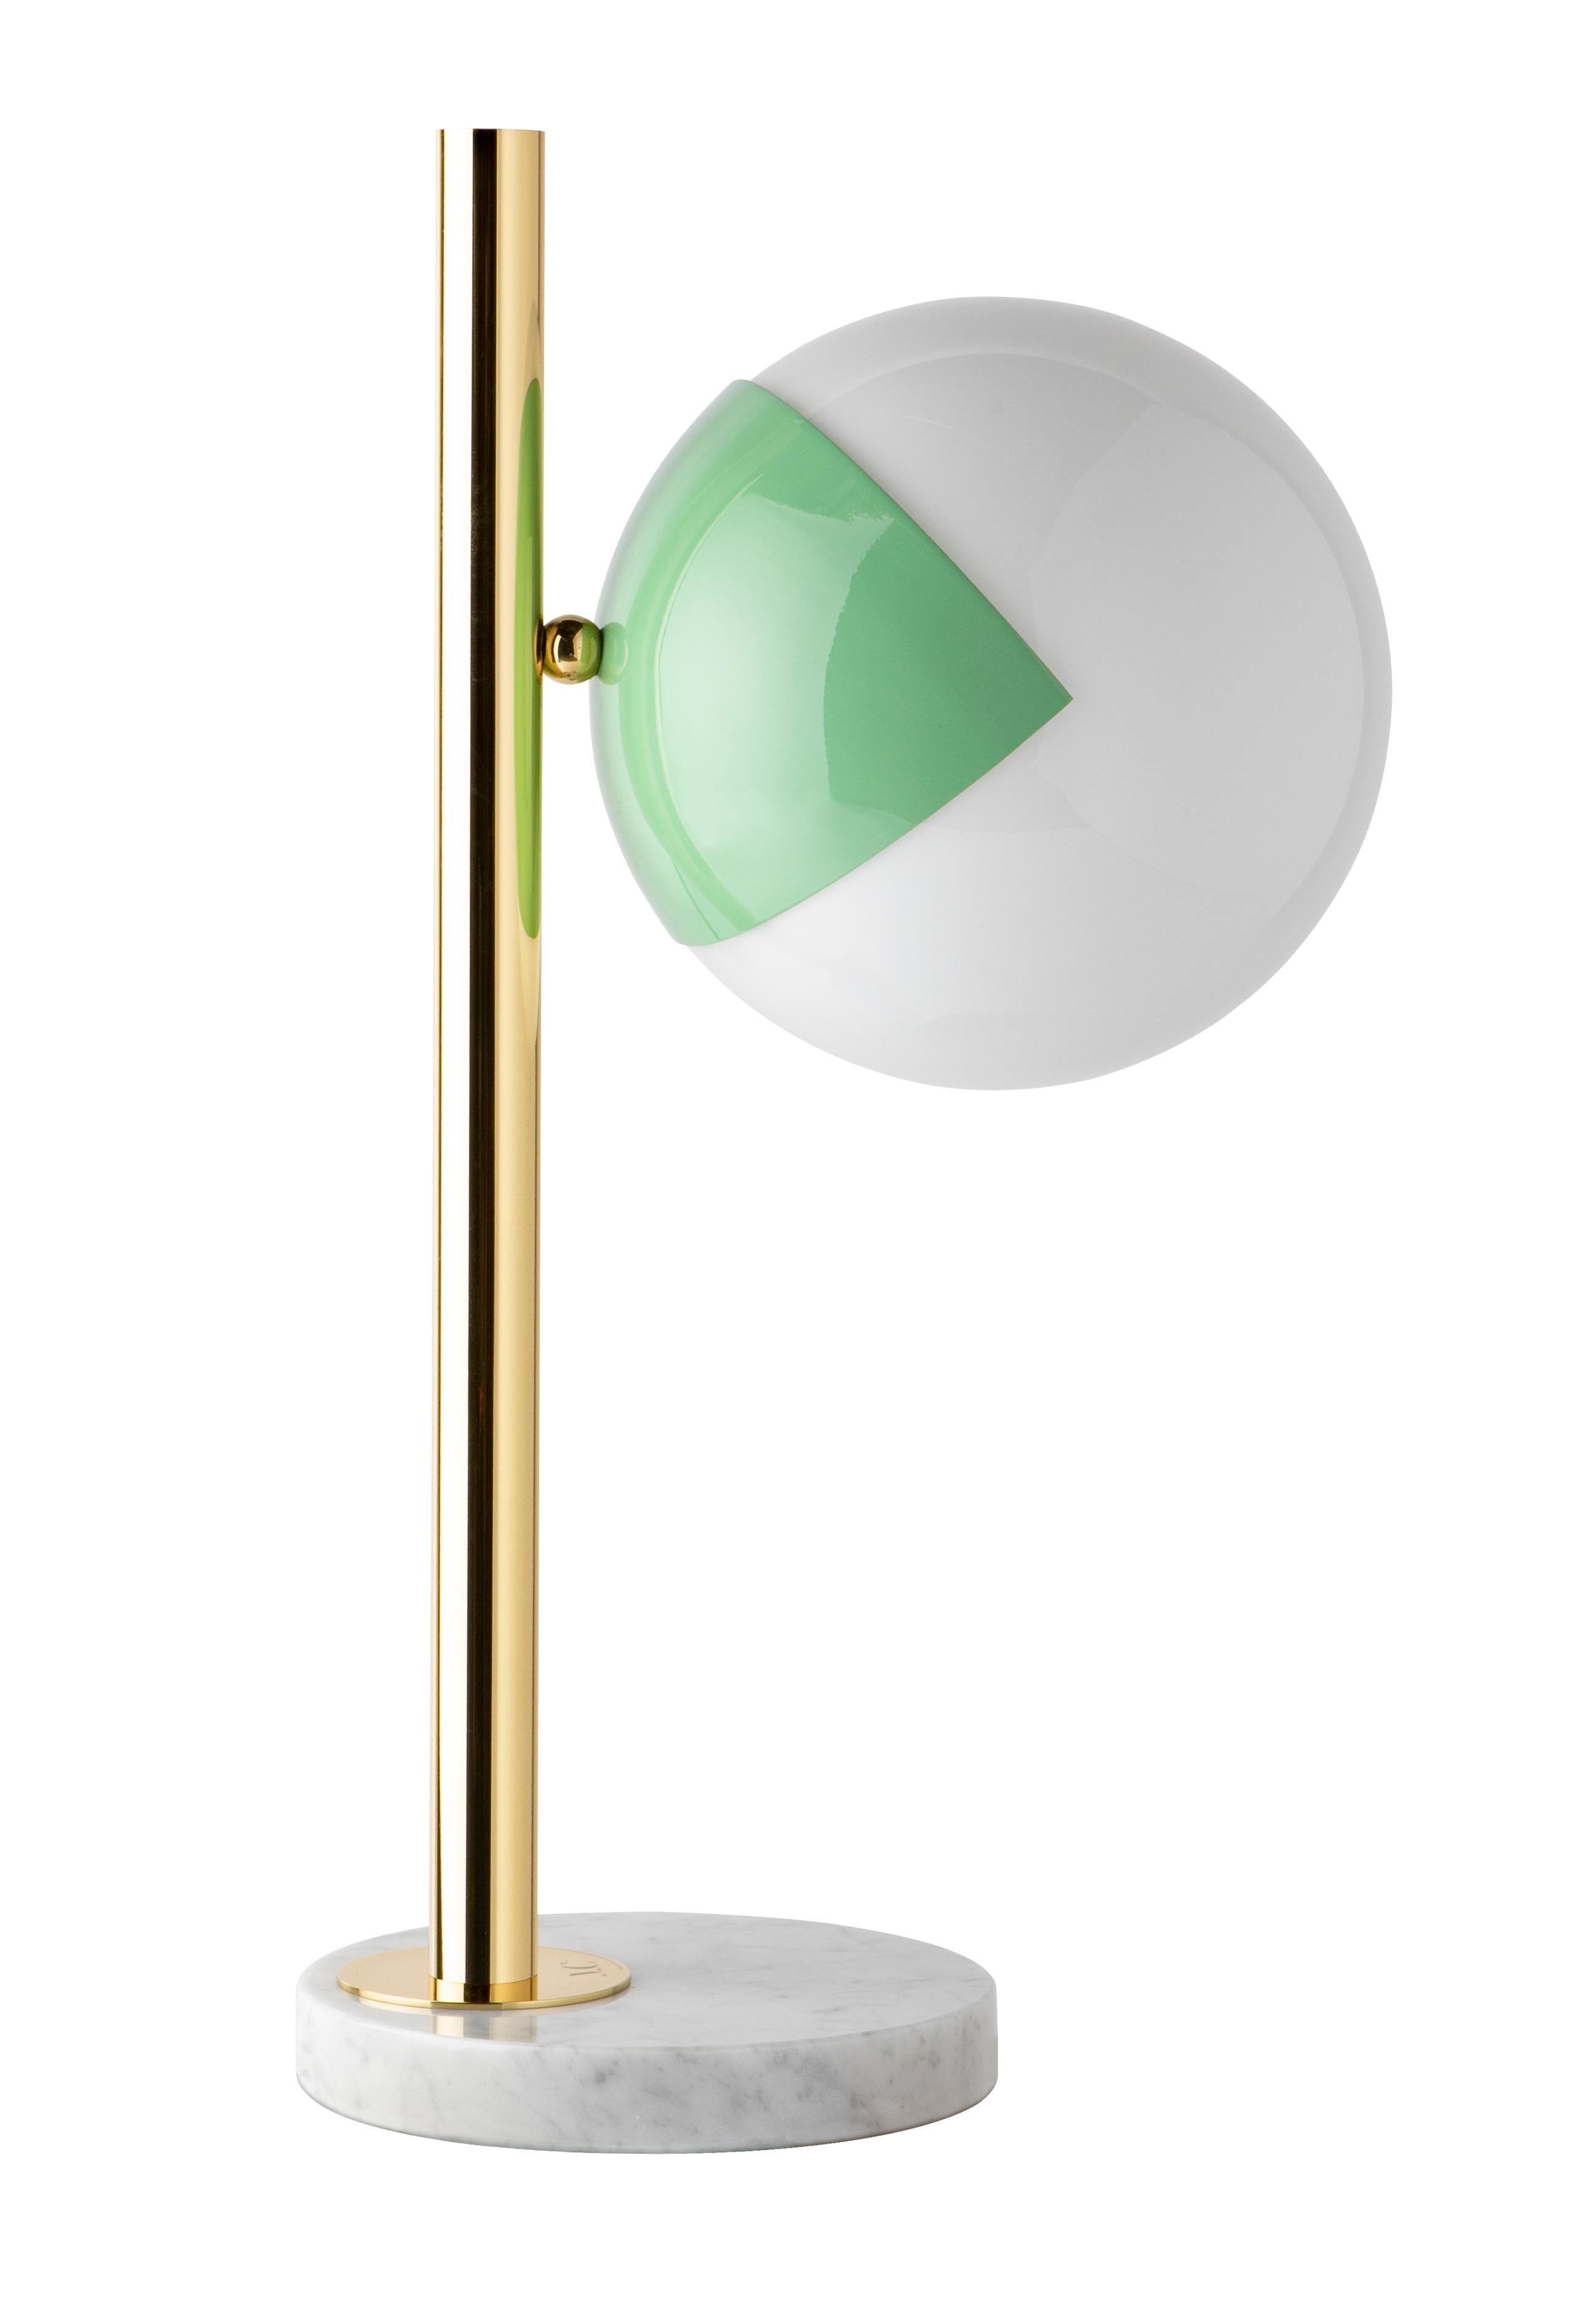 Pink table lamp pop-up dimmable by Magic Circus Editions
Dimensions: Ø 22 x 30 x 53 cm 
Materials: Carrara marble base, smooth brass tube, glossy mouth blown glass
Also non-dimmable version available.

All our lamps can be wired according to